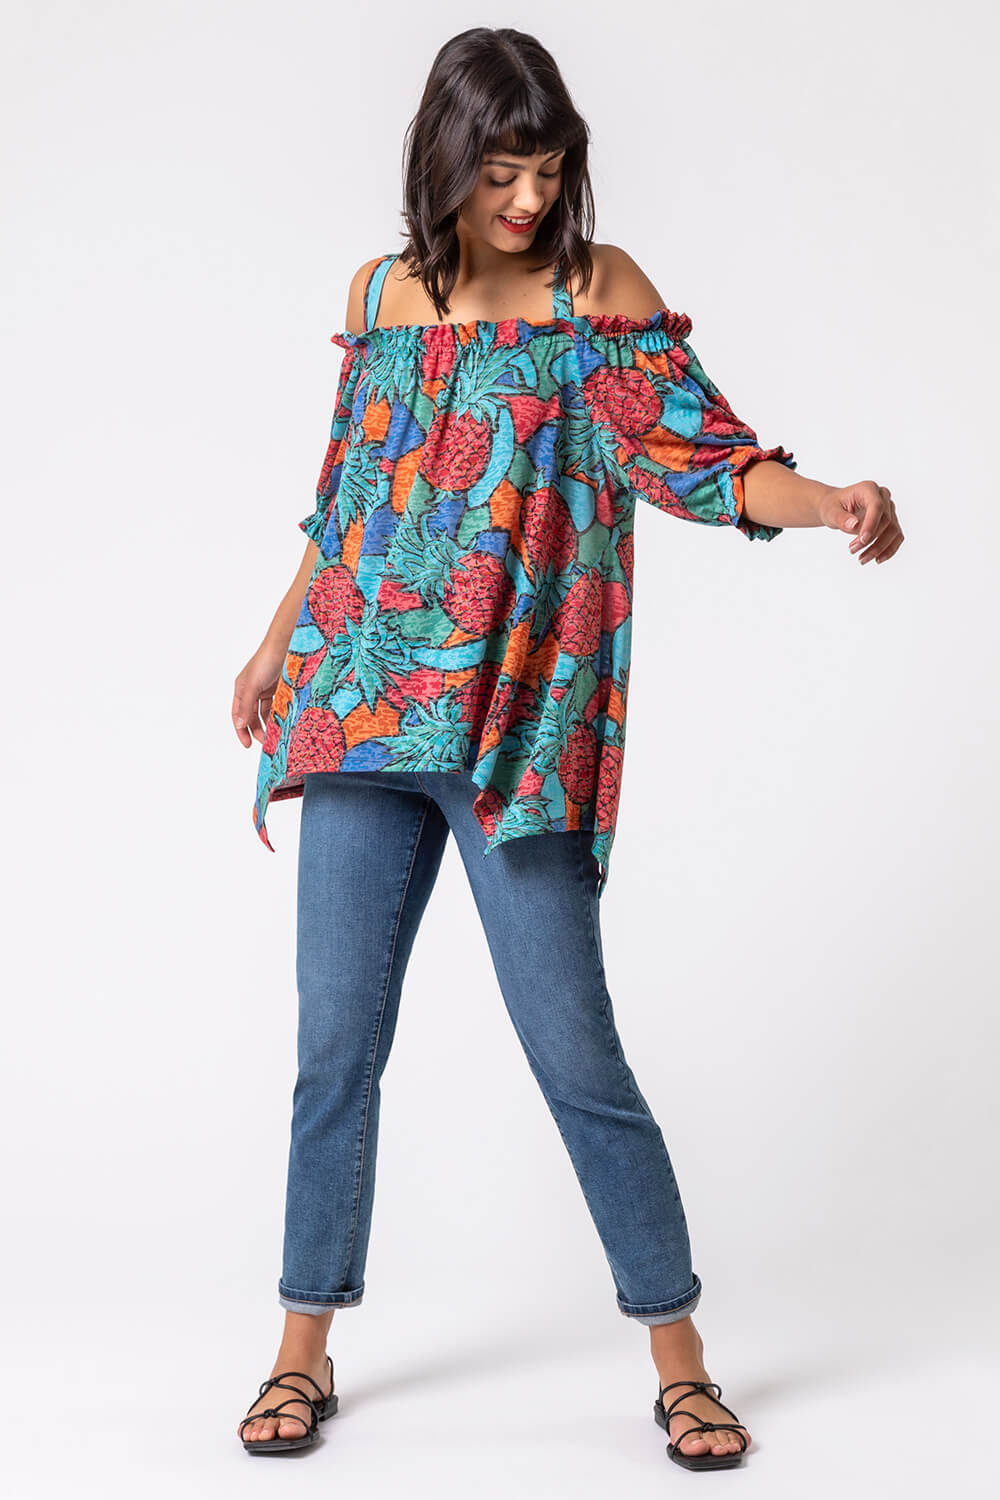 Turquoise Burnout Pineapple Print Cold Shoulder Top, Image 3 of 4